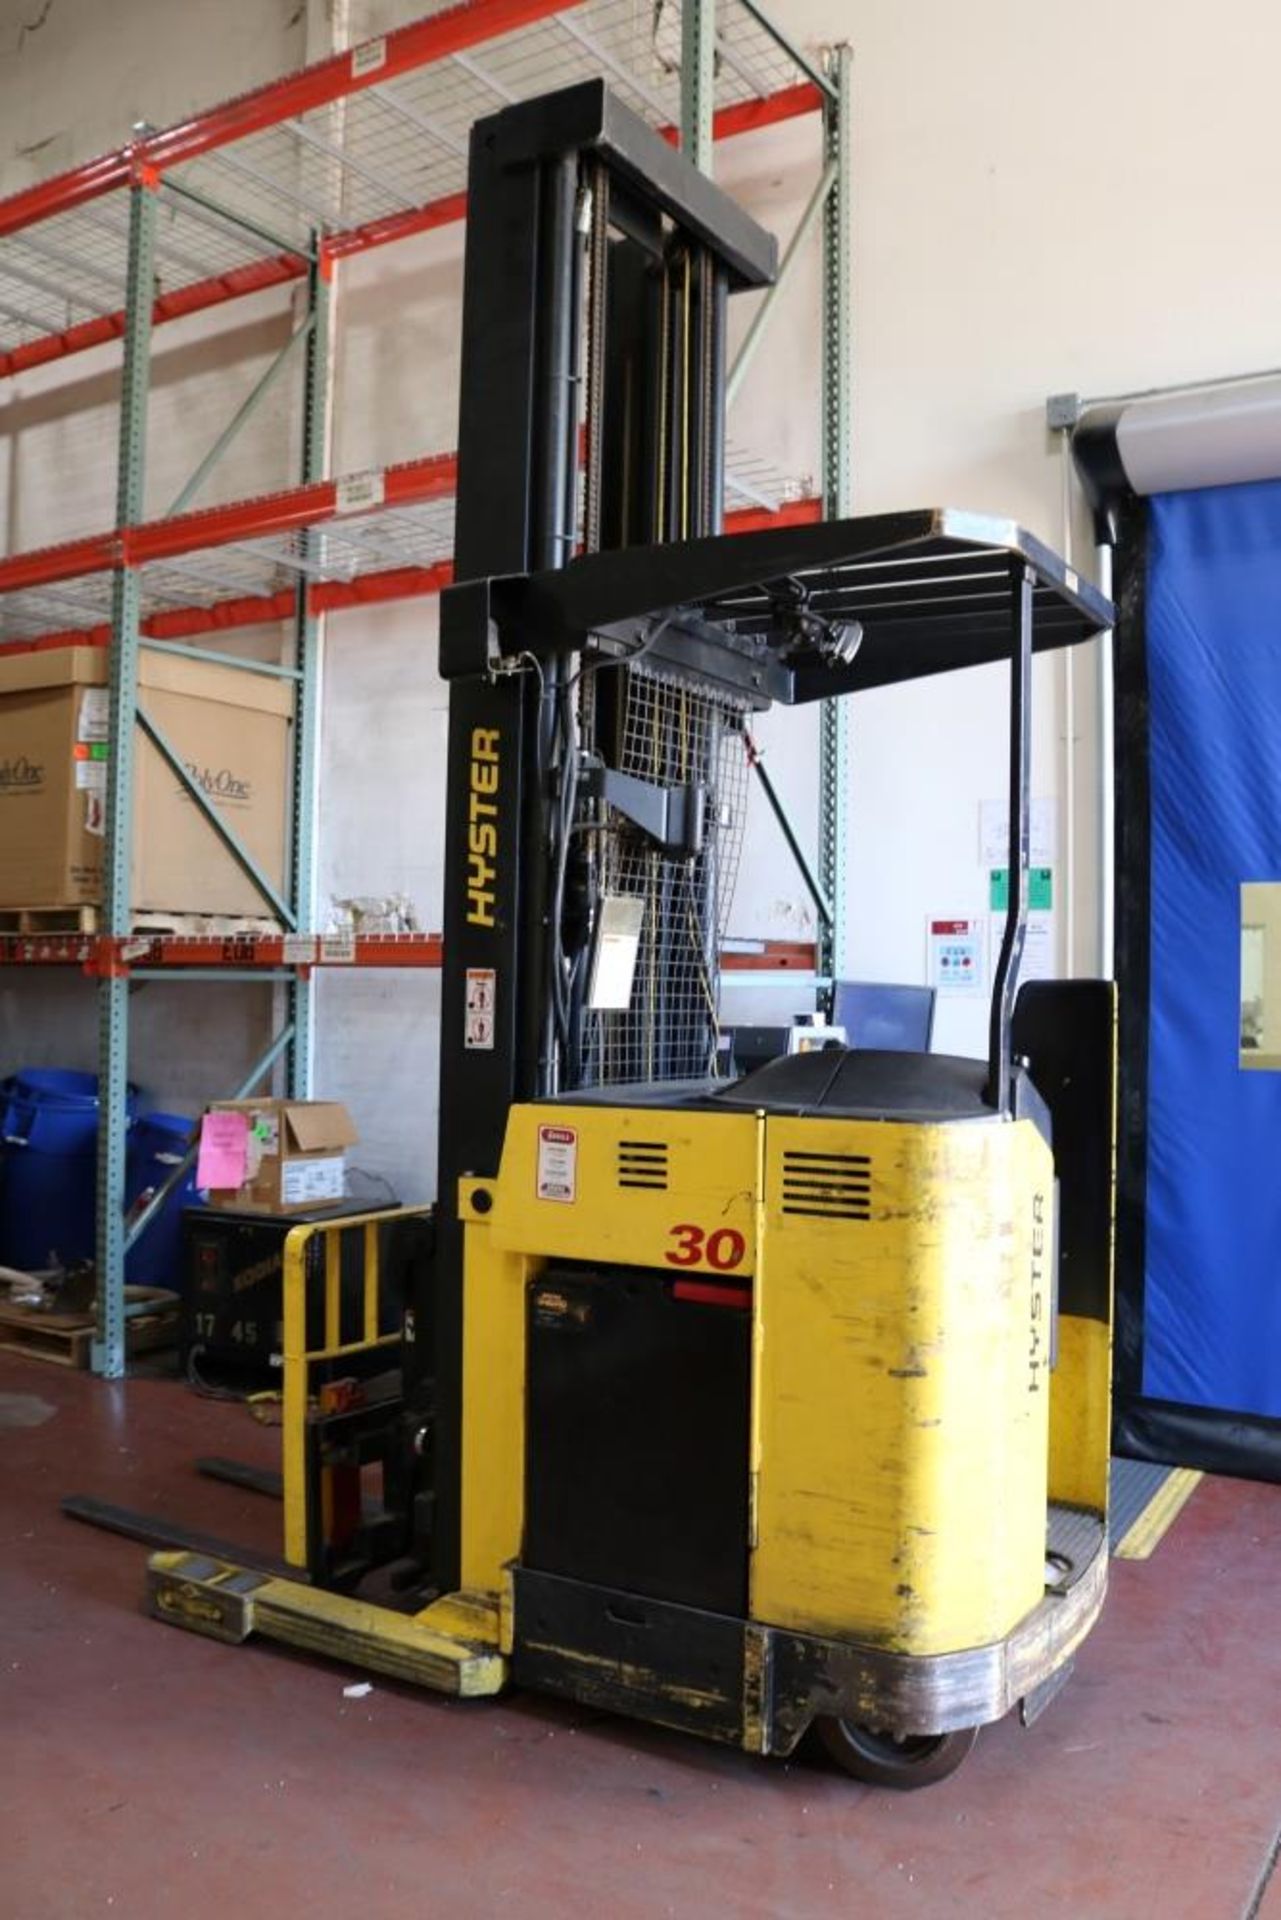 Hyster Stand Up Scissor Lift w Extended Reach Forks, Capacity 3,000 lbs. Overall Weight 10,060